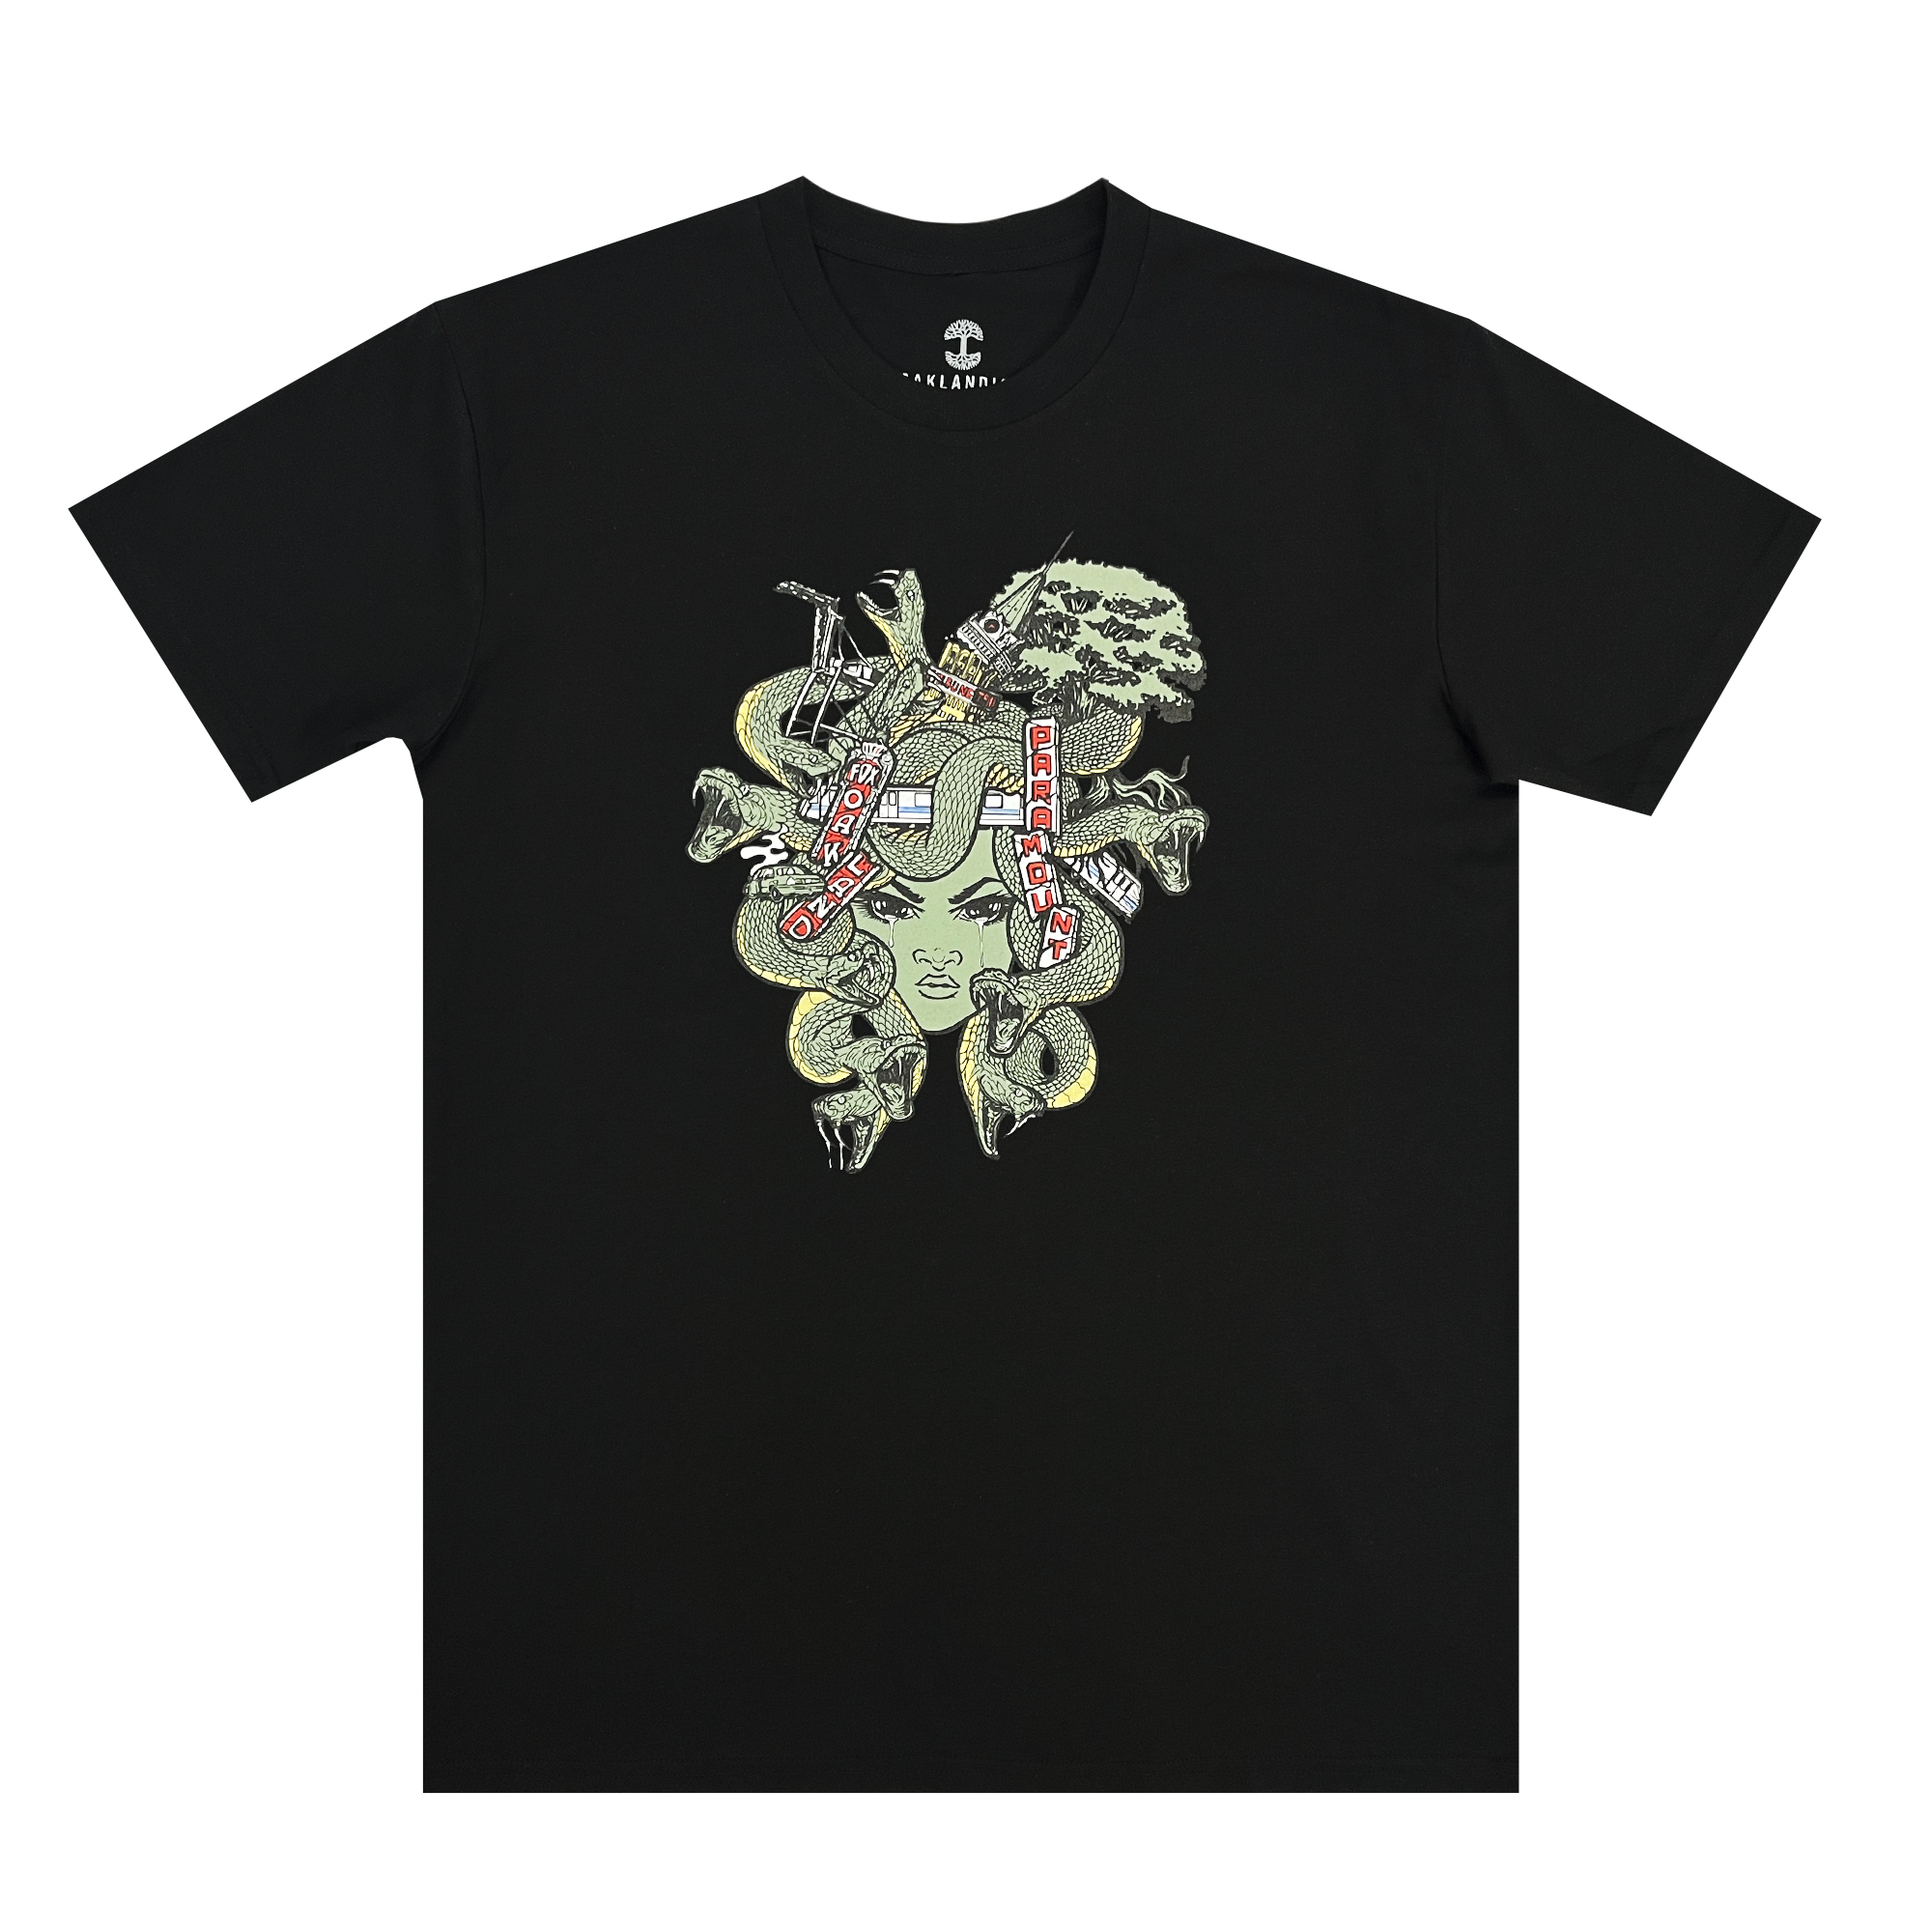 Front view of a black t-shirt with elaborate Medusa monster of the mind graphic.